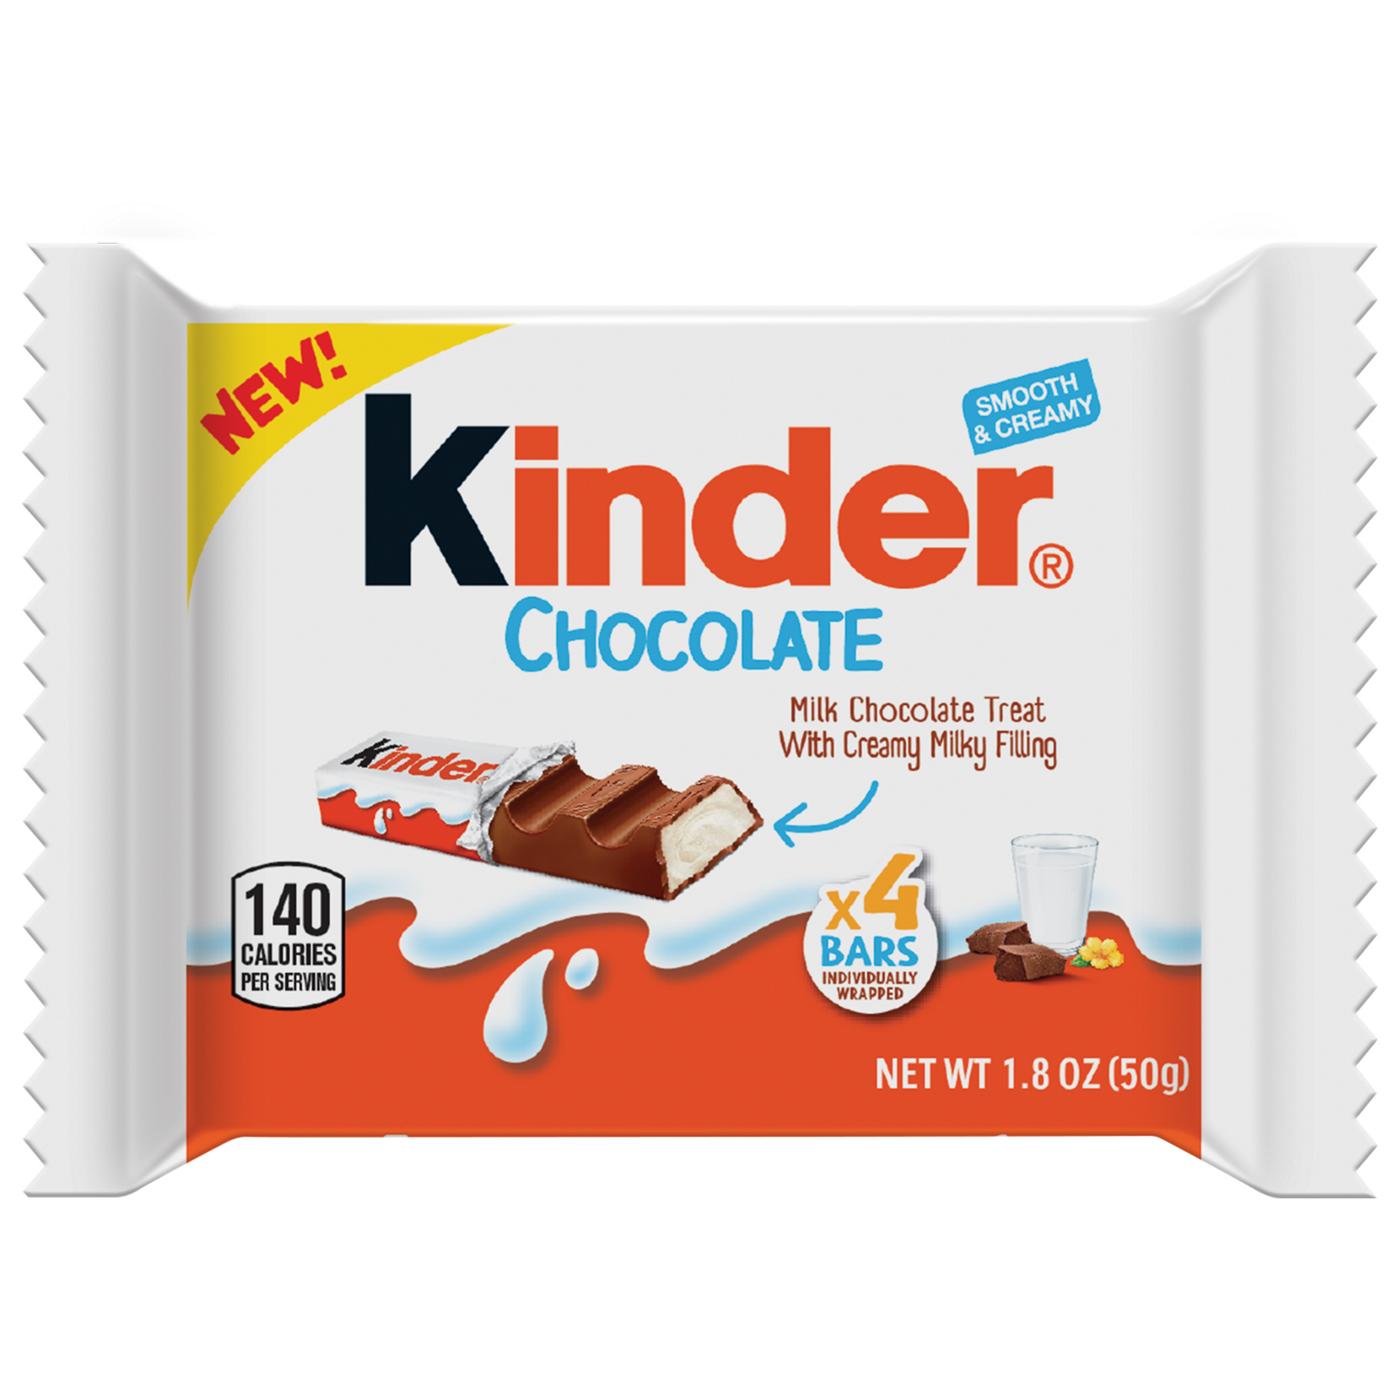 Kinder Chocolate with Creamy Milky Filling Candy Bars; image 1 of 5